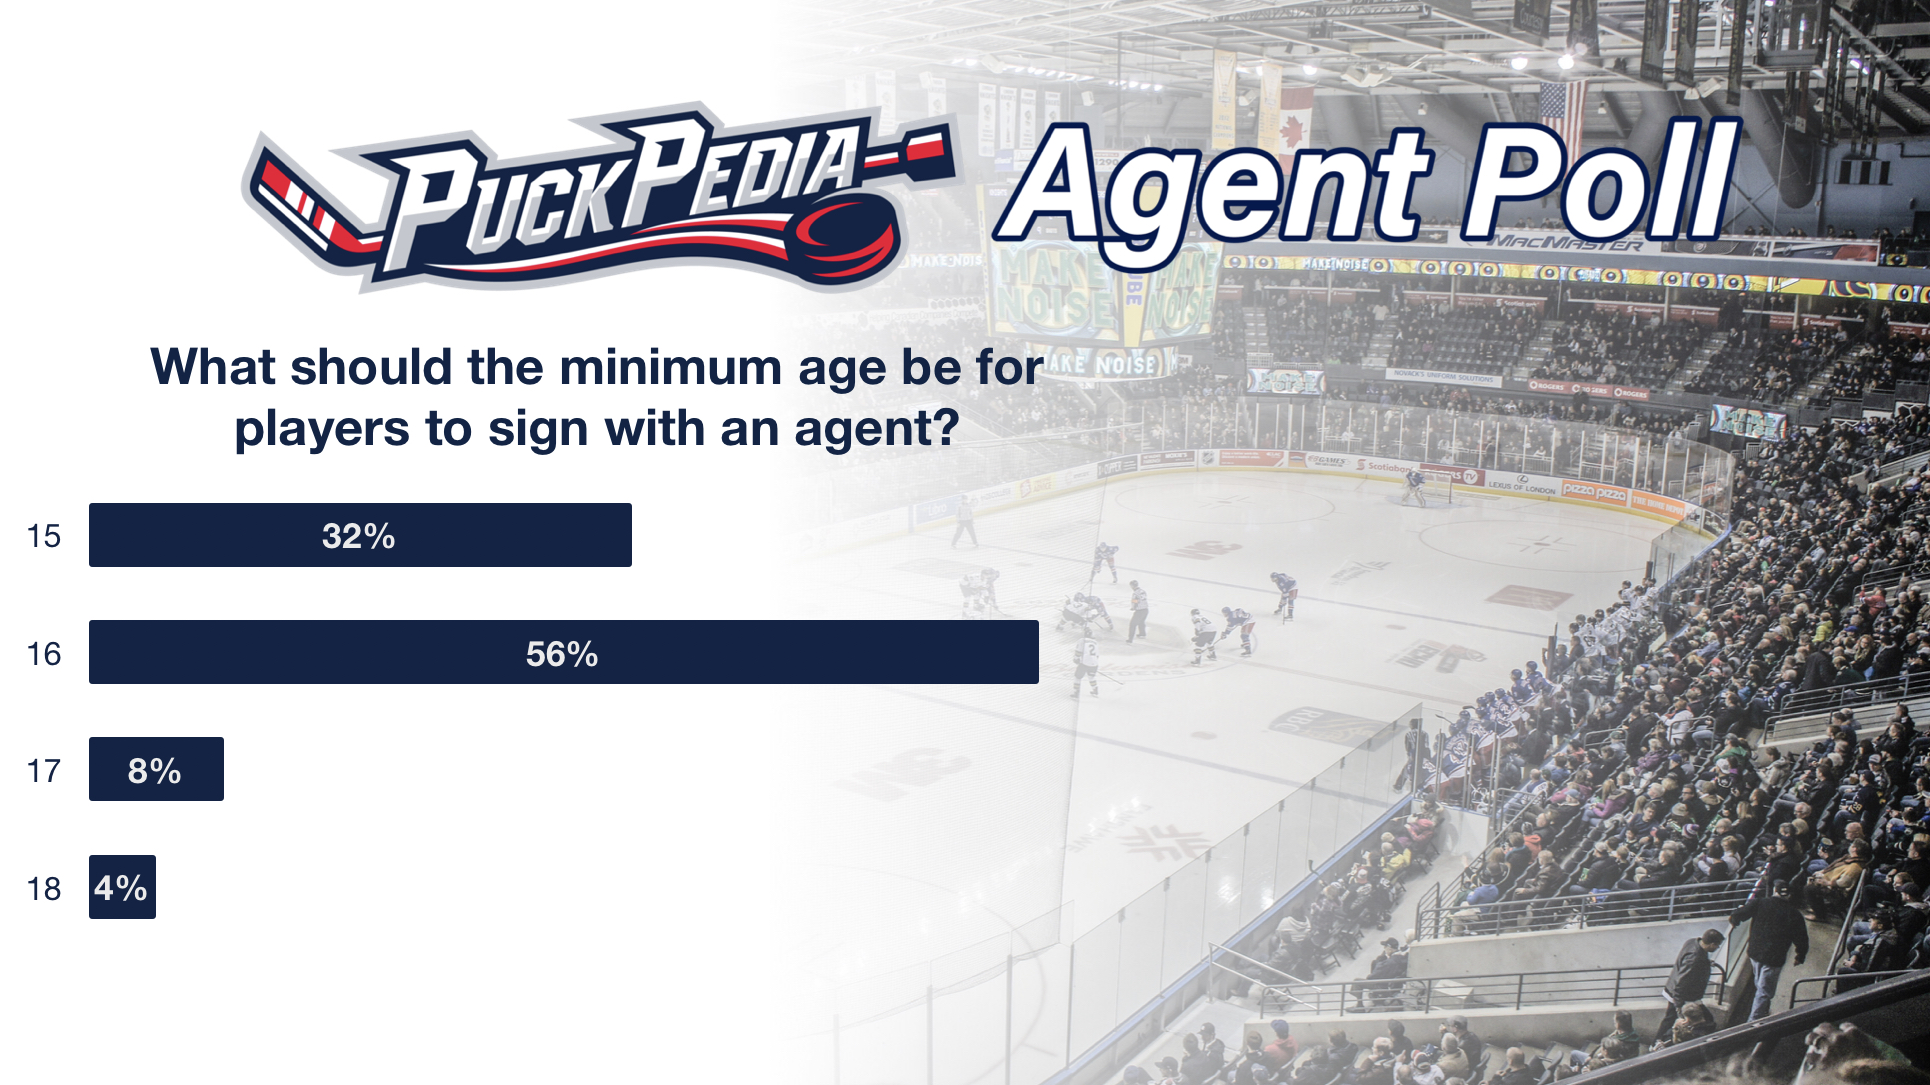 What should the minimum age be for Players to sign with an Agent